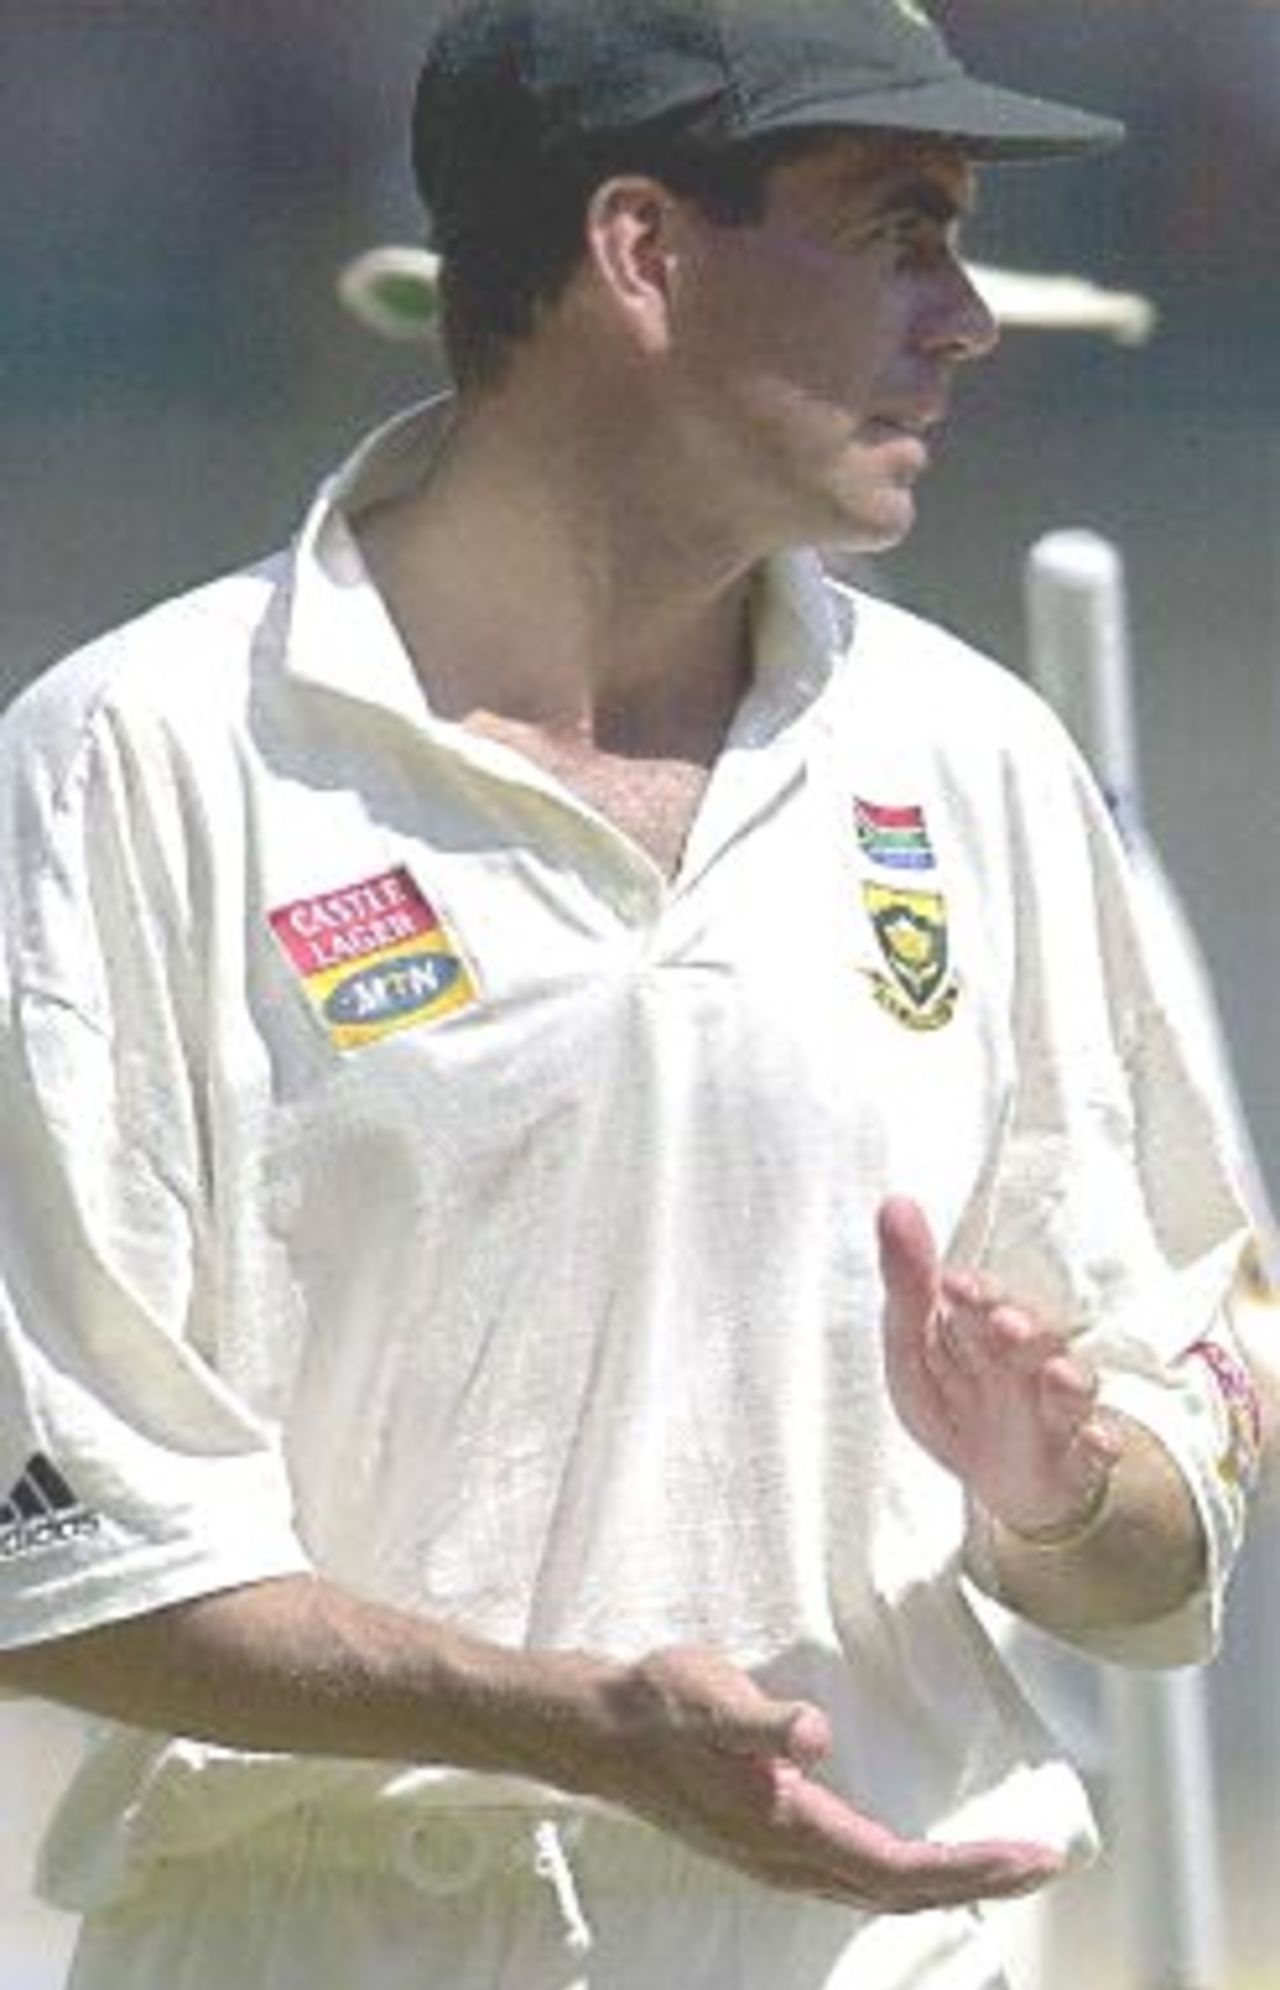 (FILES) Picture dated 06 March 2000 shows South African skipper Hansie Cronje applauding as he leaves the pitch after South Africa beat India in the second test by an inning and 71 runs to take the Pepsi series 2-0 and end India's 13 year unbeaten home record. Cronje said it was one of the best performances by a South African team since the country returned to the international fold in 91/92. New Delhi police have registered charges against skipper Gronje and other members of his team for match fixing during the recent one-day series with India, a highly placed police source said 07 April 2000.